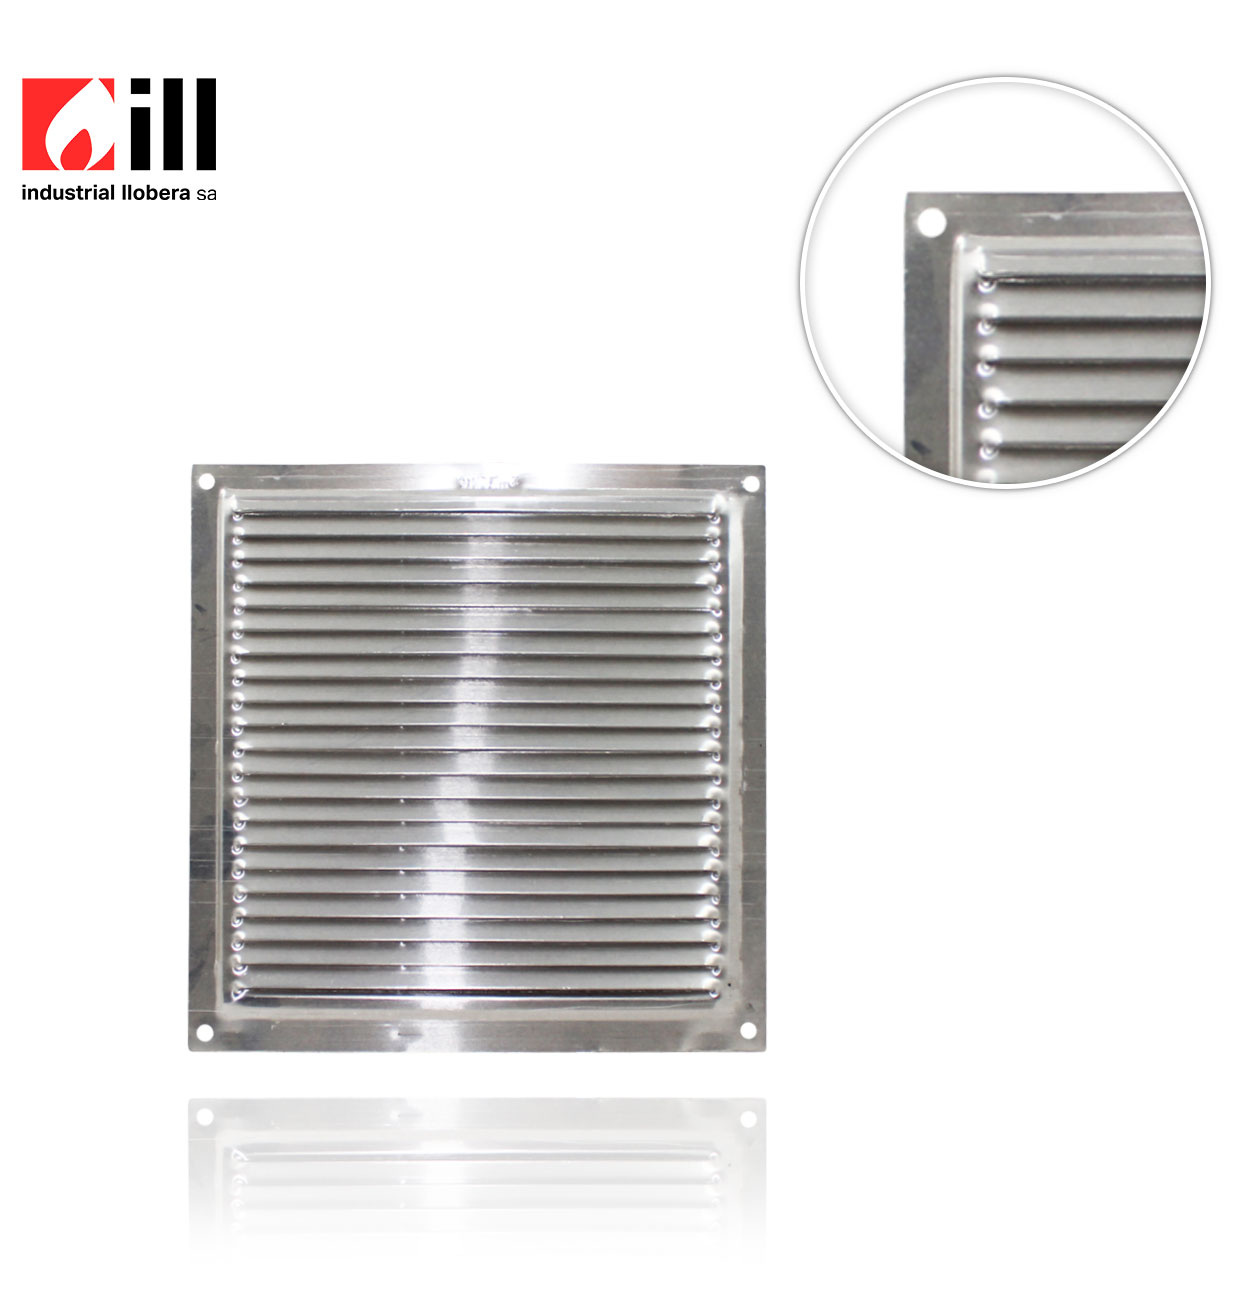 20x20cm SILVER-PLATED VENTILATION GRILLE